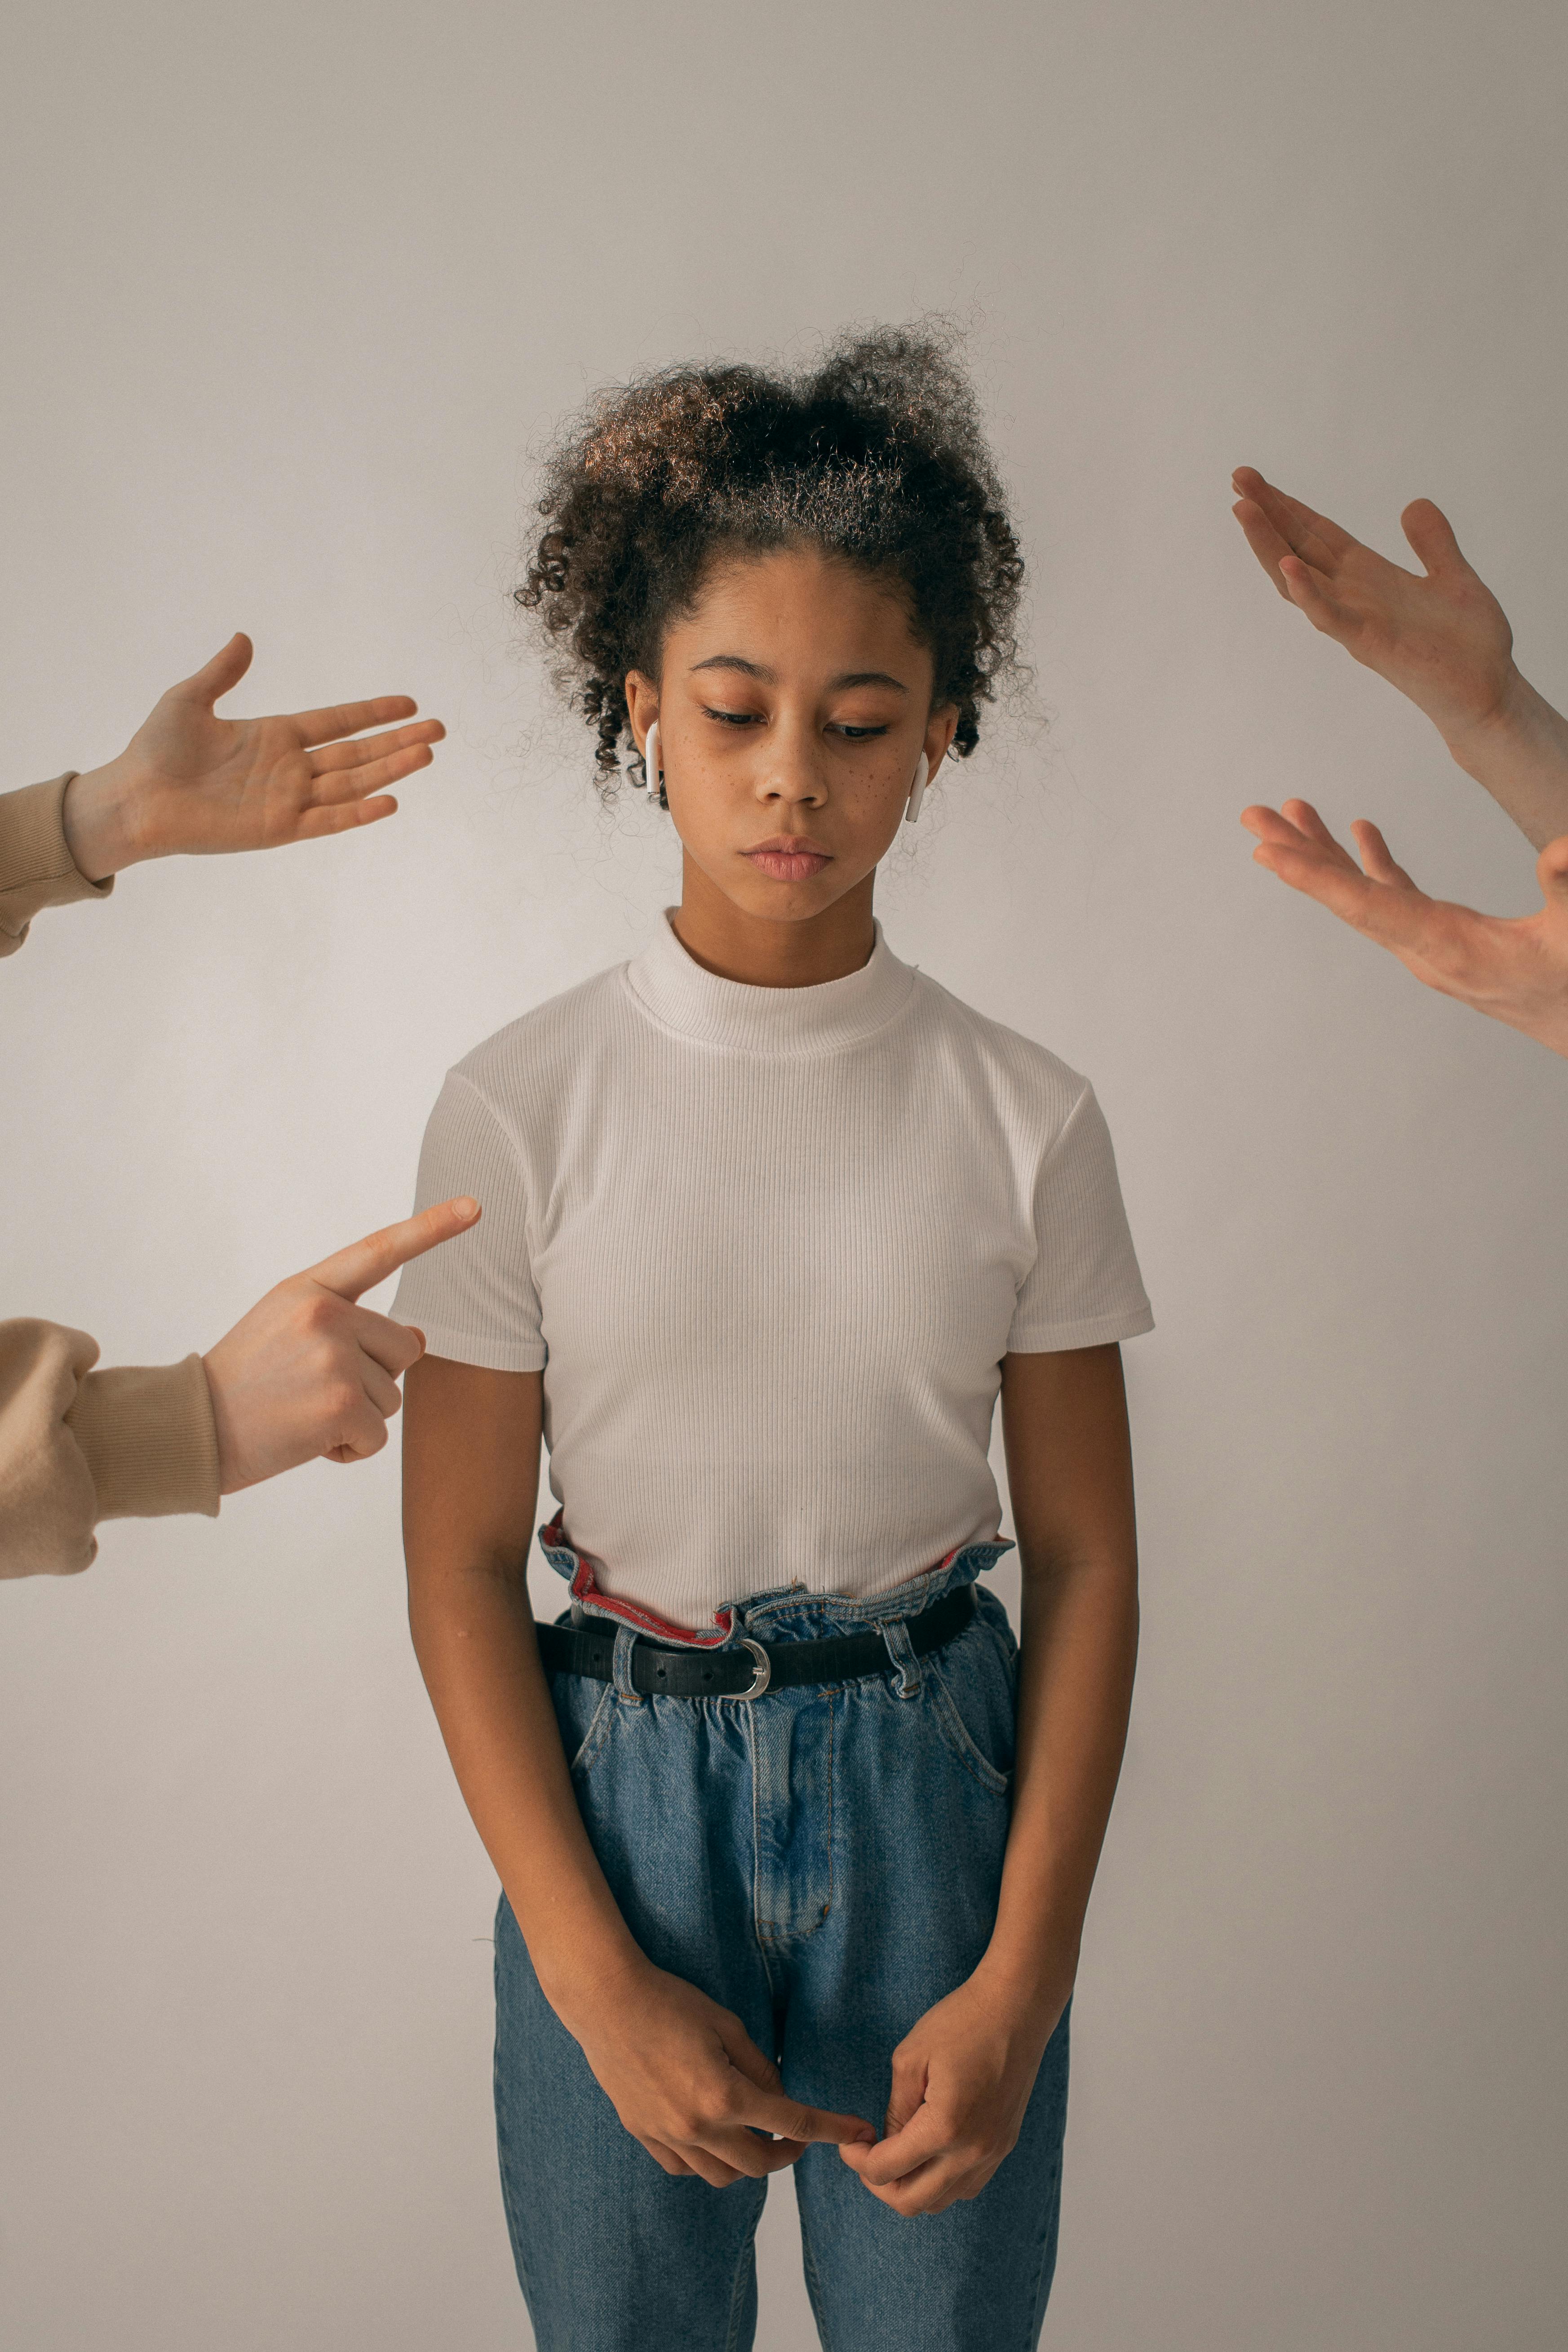 People gesturing while scolding a sad young girl | Source: Pexels